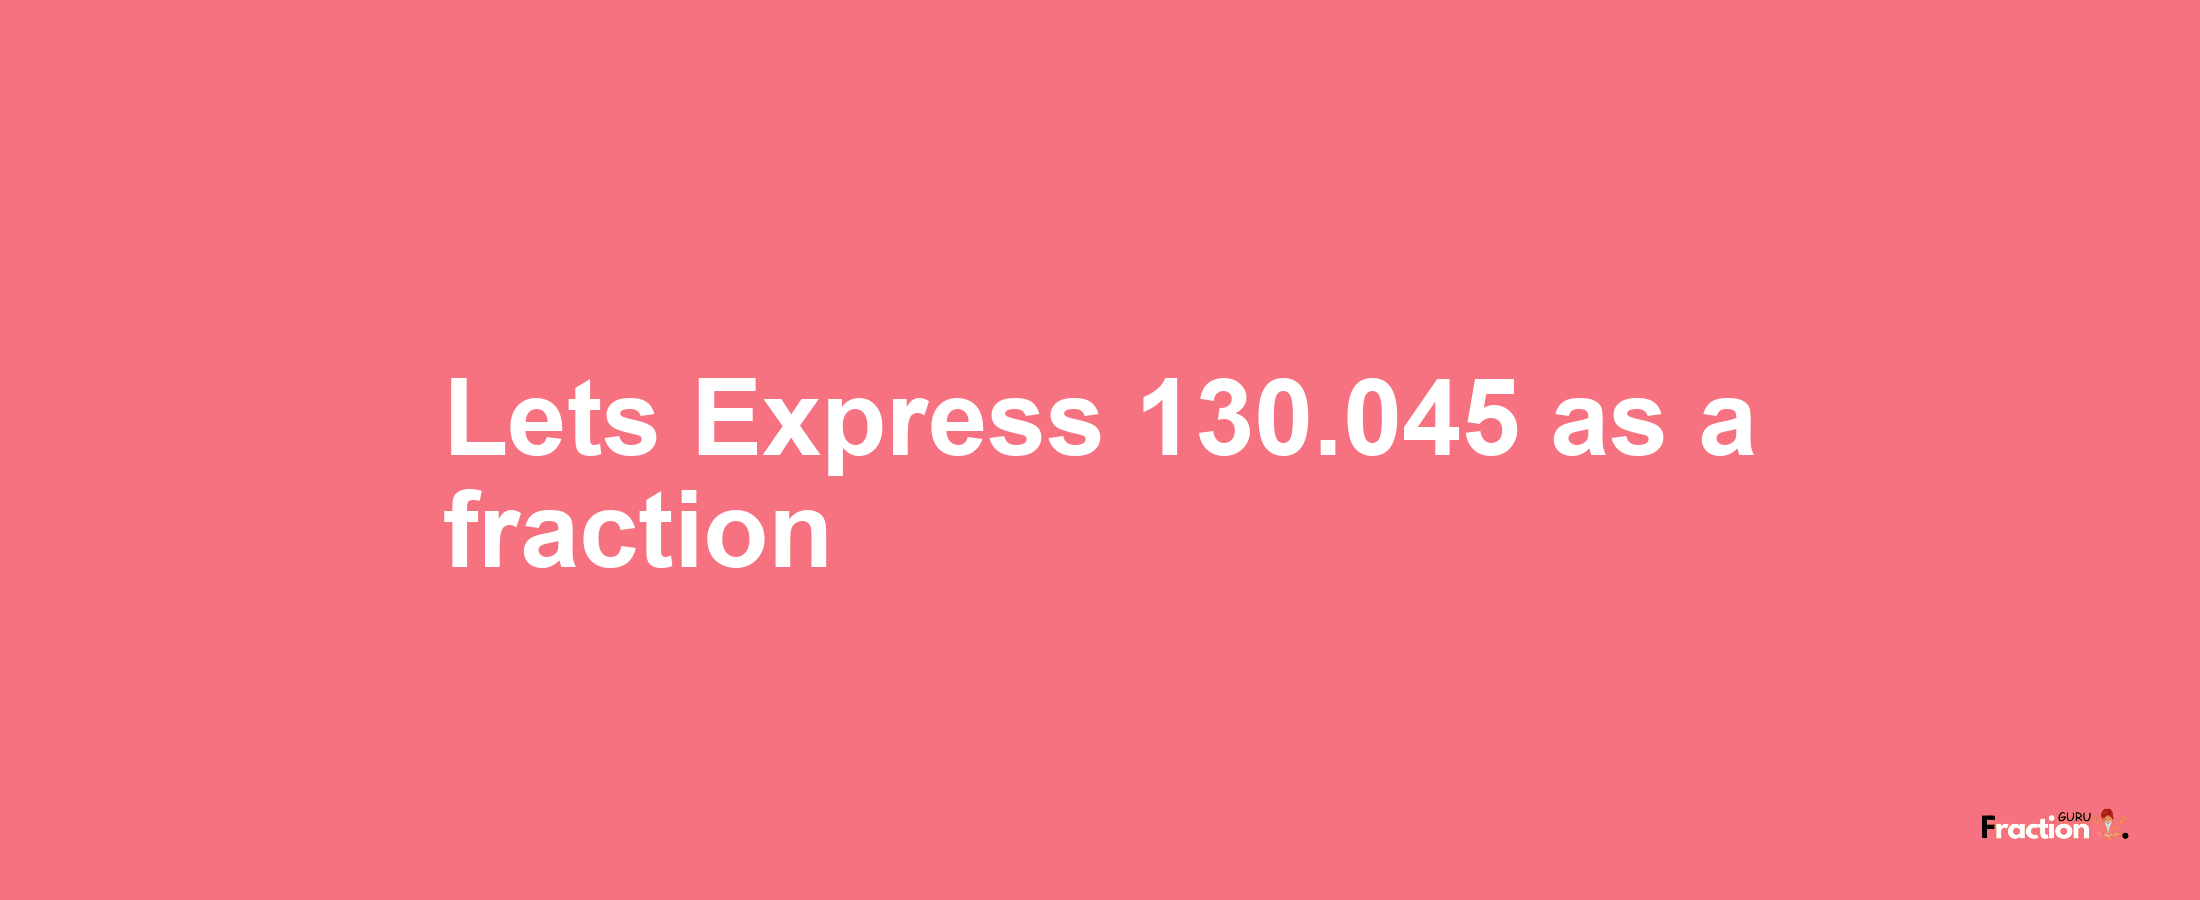 Lets Express 130.045 as afraction